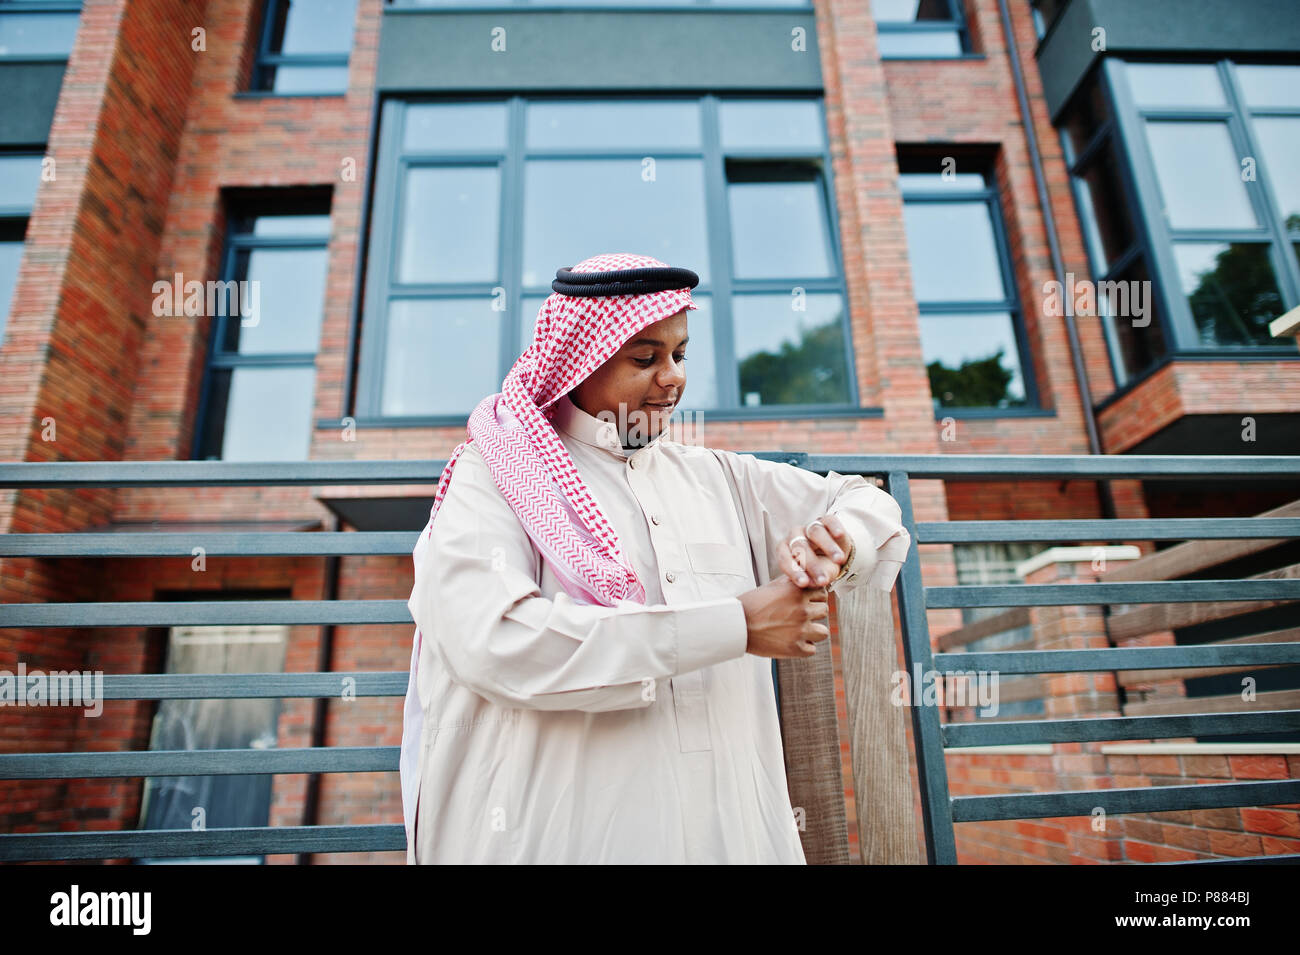 Middle Eastern arab man posed on street against modern building looking at his golden watches. Stock Photo